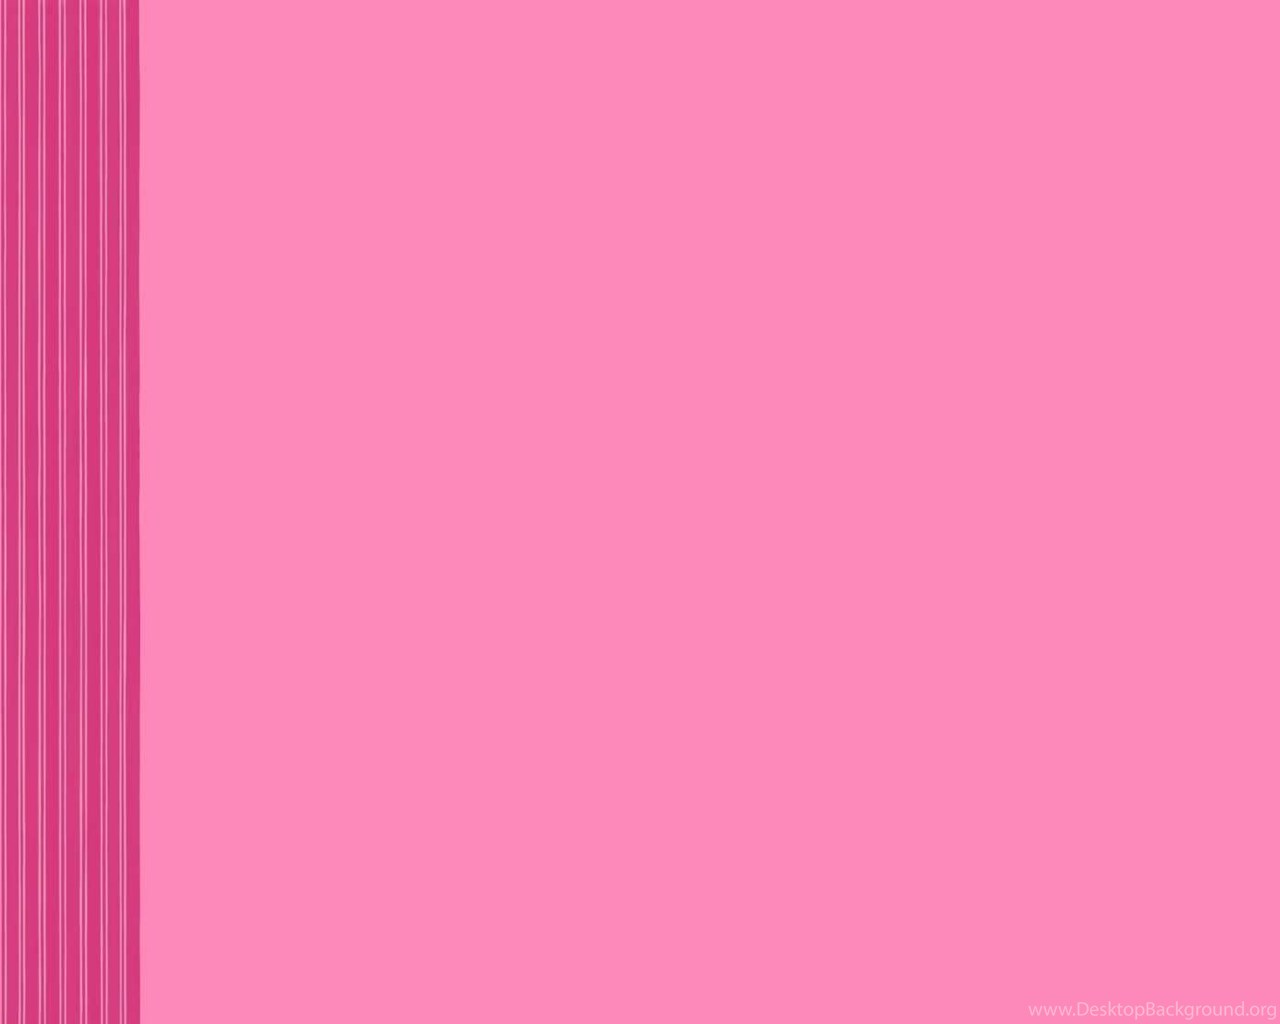 Bubblegum Pink Free PPT Backgrounds For Your PowerPoint Templates